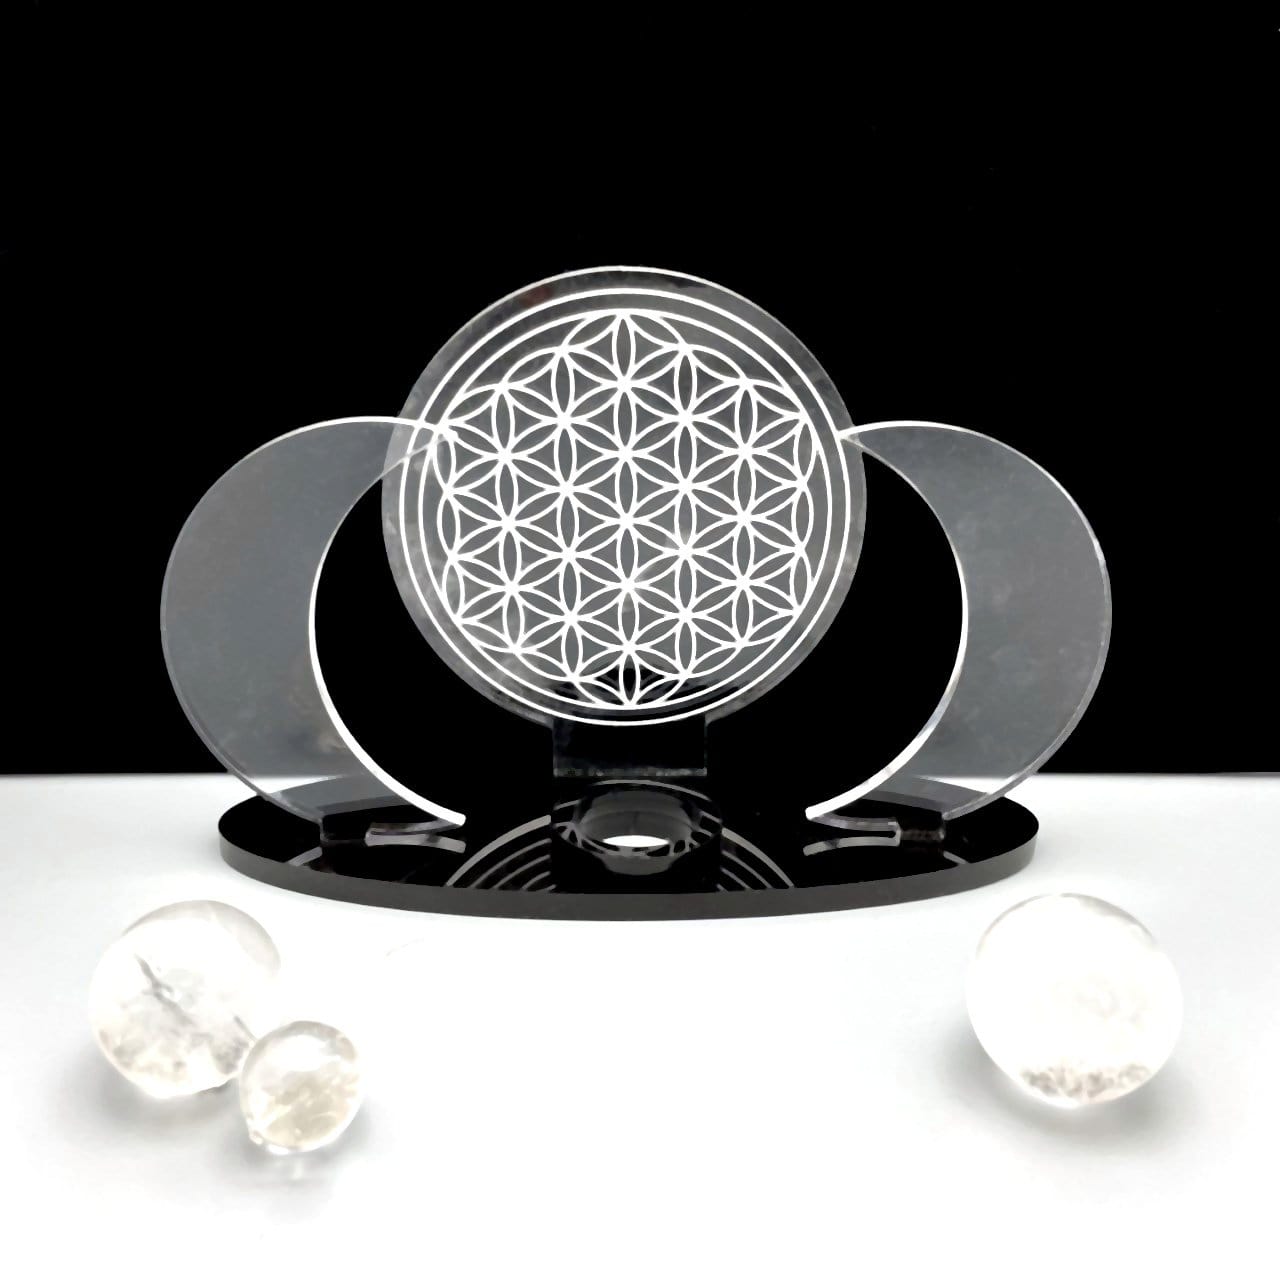 An Acrylic Sphere Holder Crescent Moons with Flower of Life with no sphere. Surrounding spheres are for display.